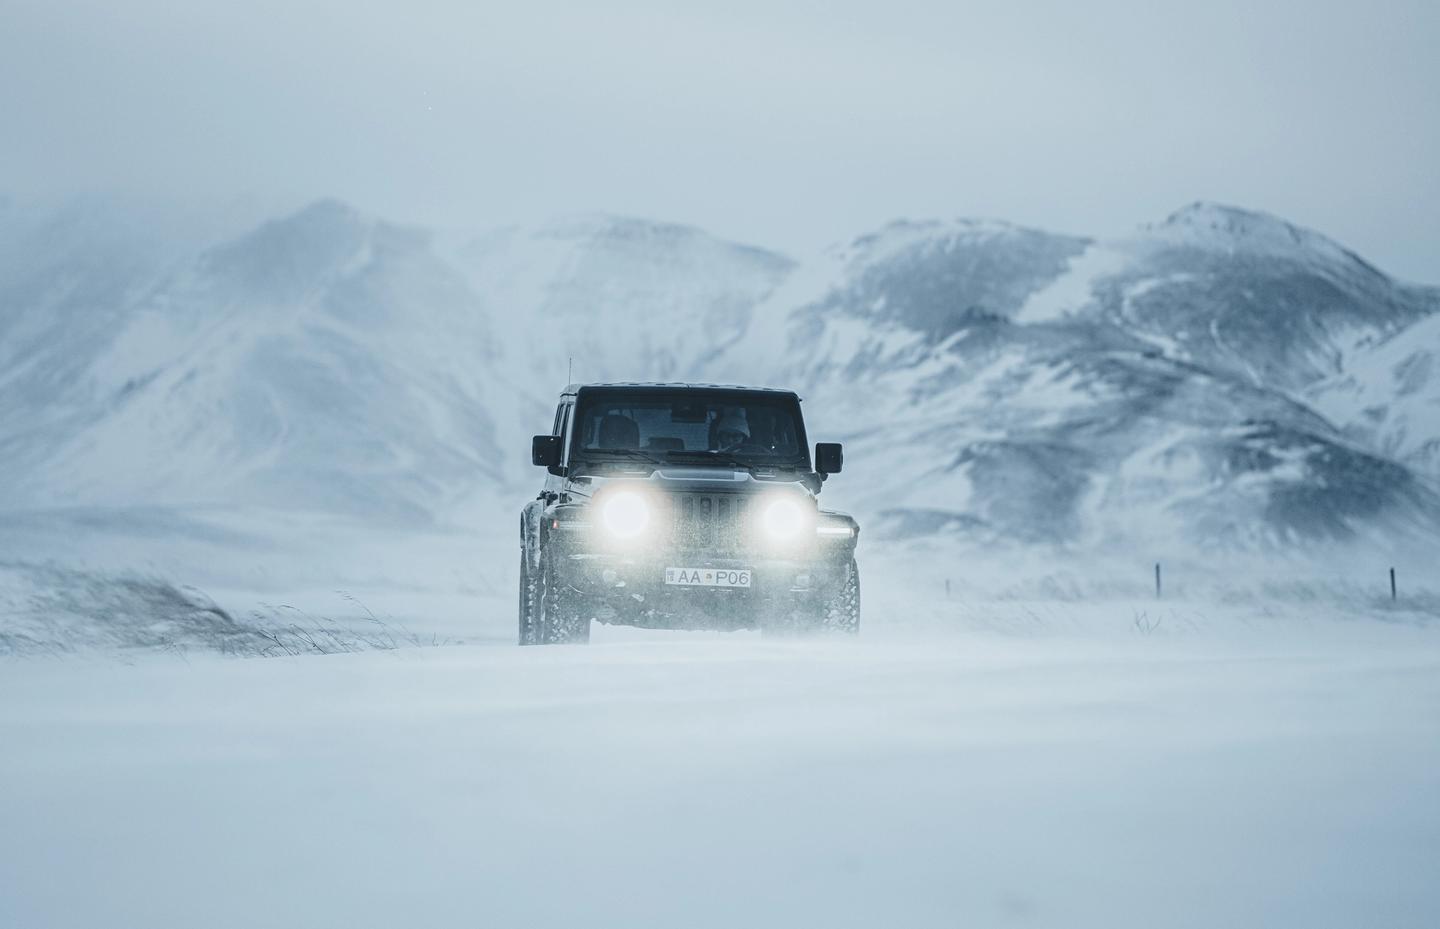 4x4 rental car Jeep Wrangler Rubicon driving in the winter in Iceland